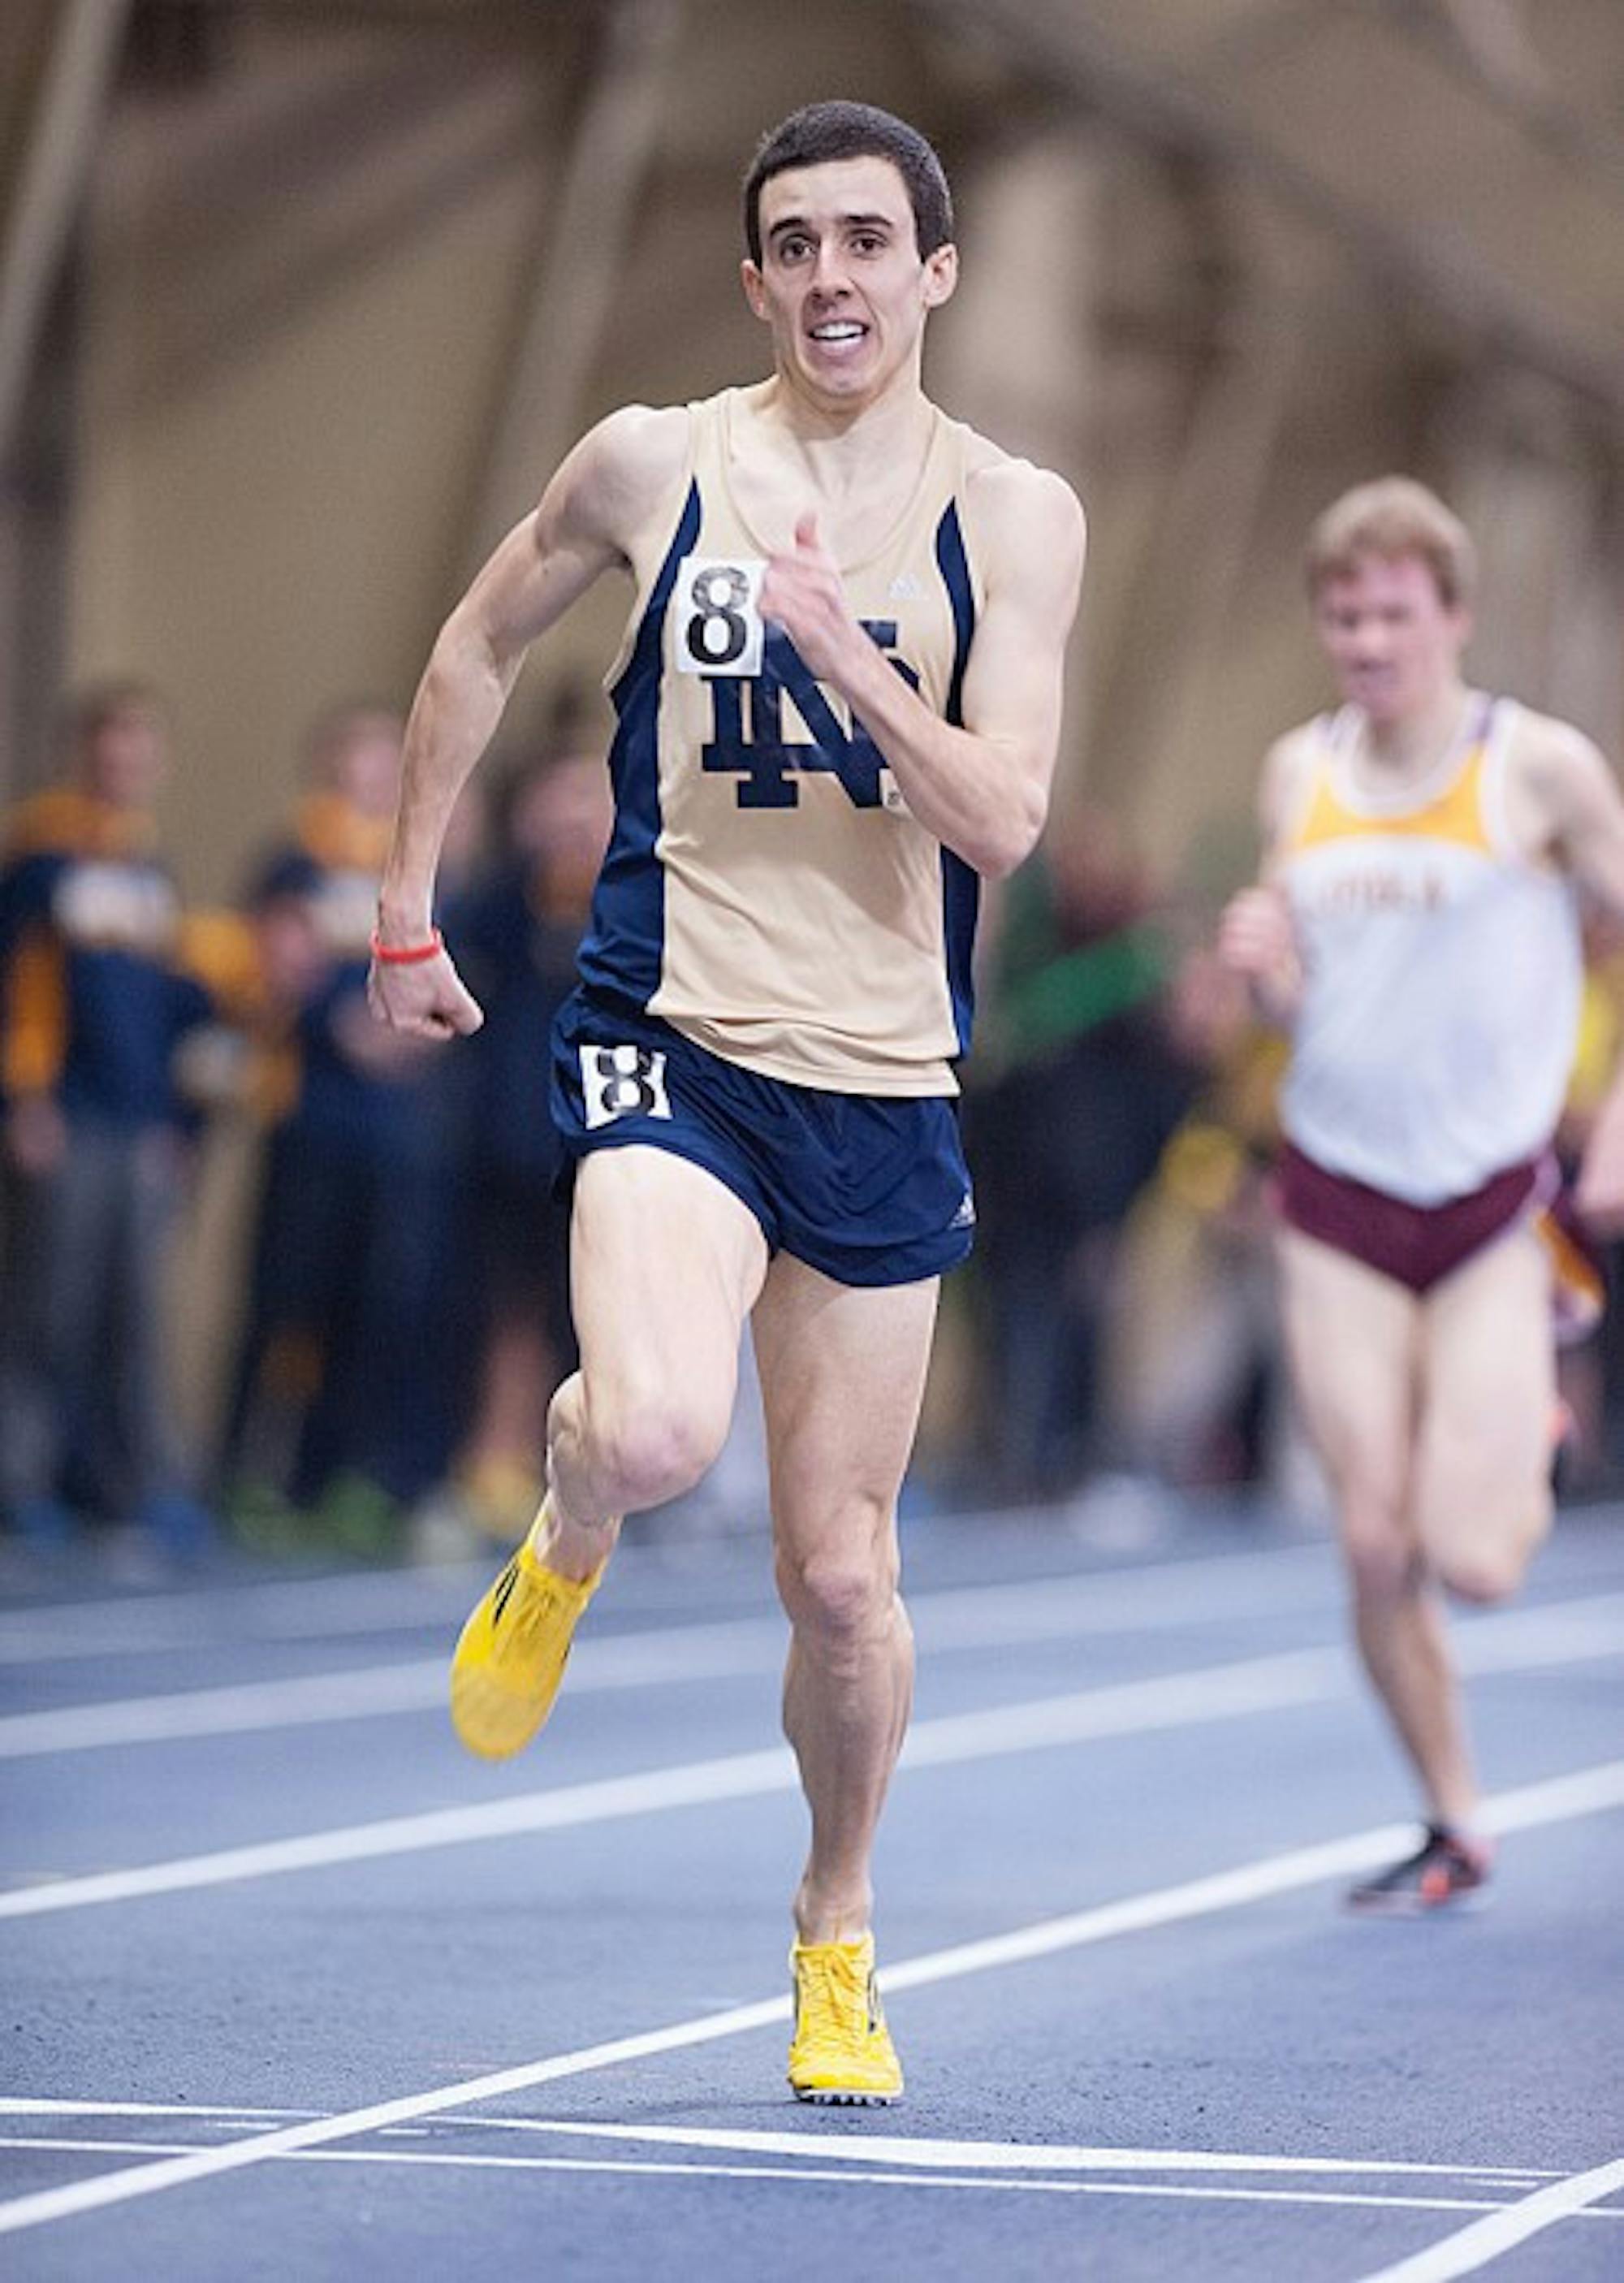 Graduate student Jeremy Rae crosses the finish line for the mile at the Meyo Invitational on Saturday at Loftus Sports Center. Rae won the race in 3:57.25, which set a school record.